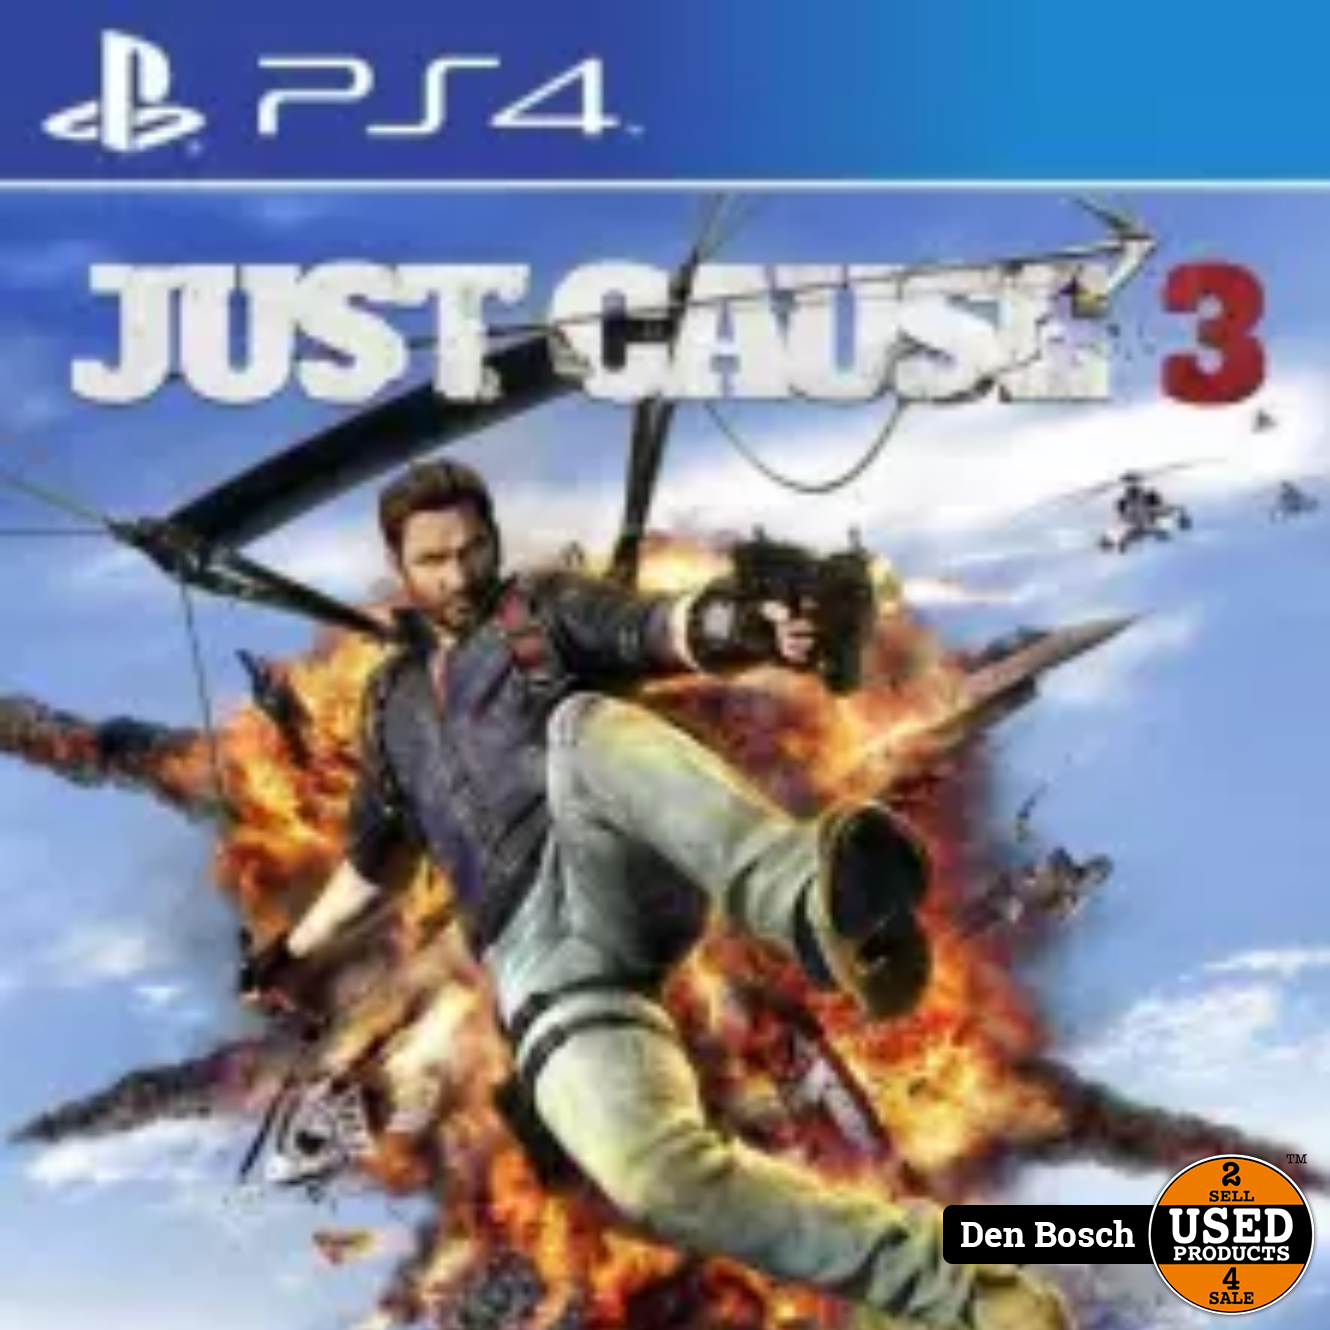 Monnik Discipline heks Just Cause 3 - PS4 Game - Used Products Den Bosch